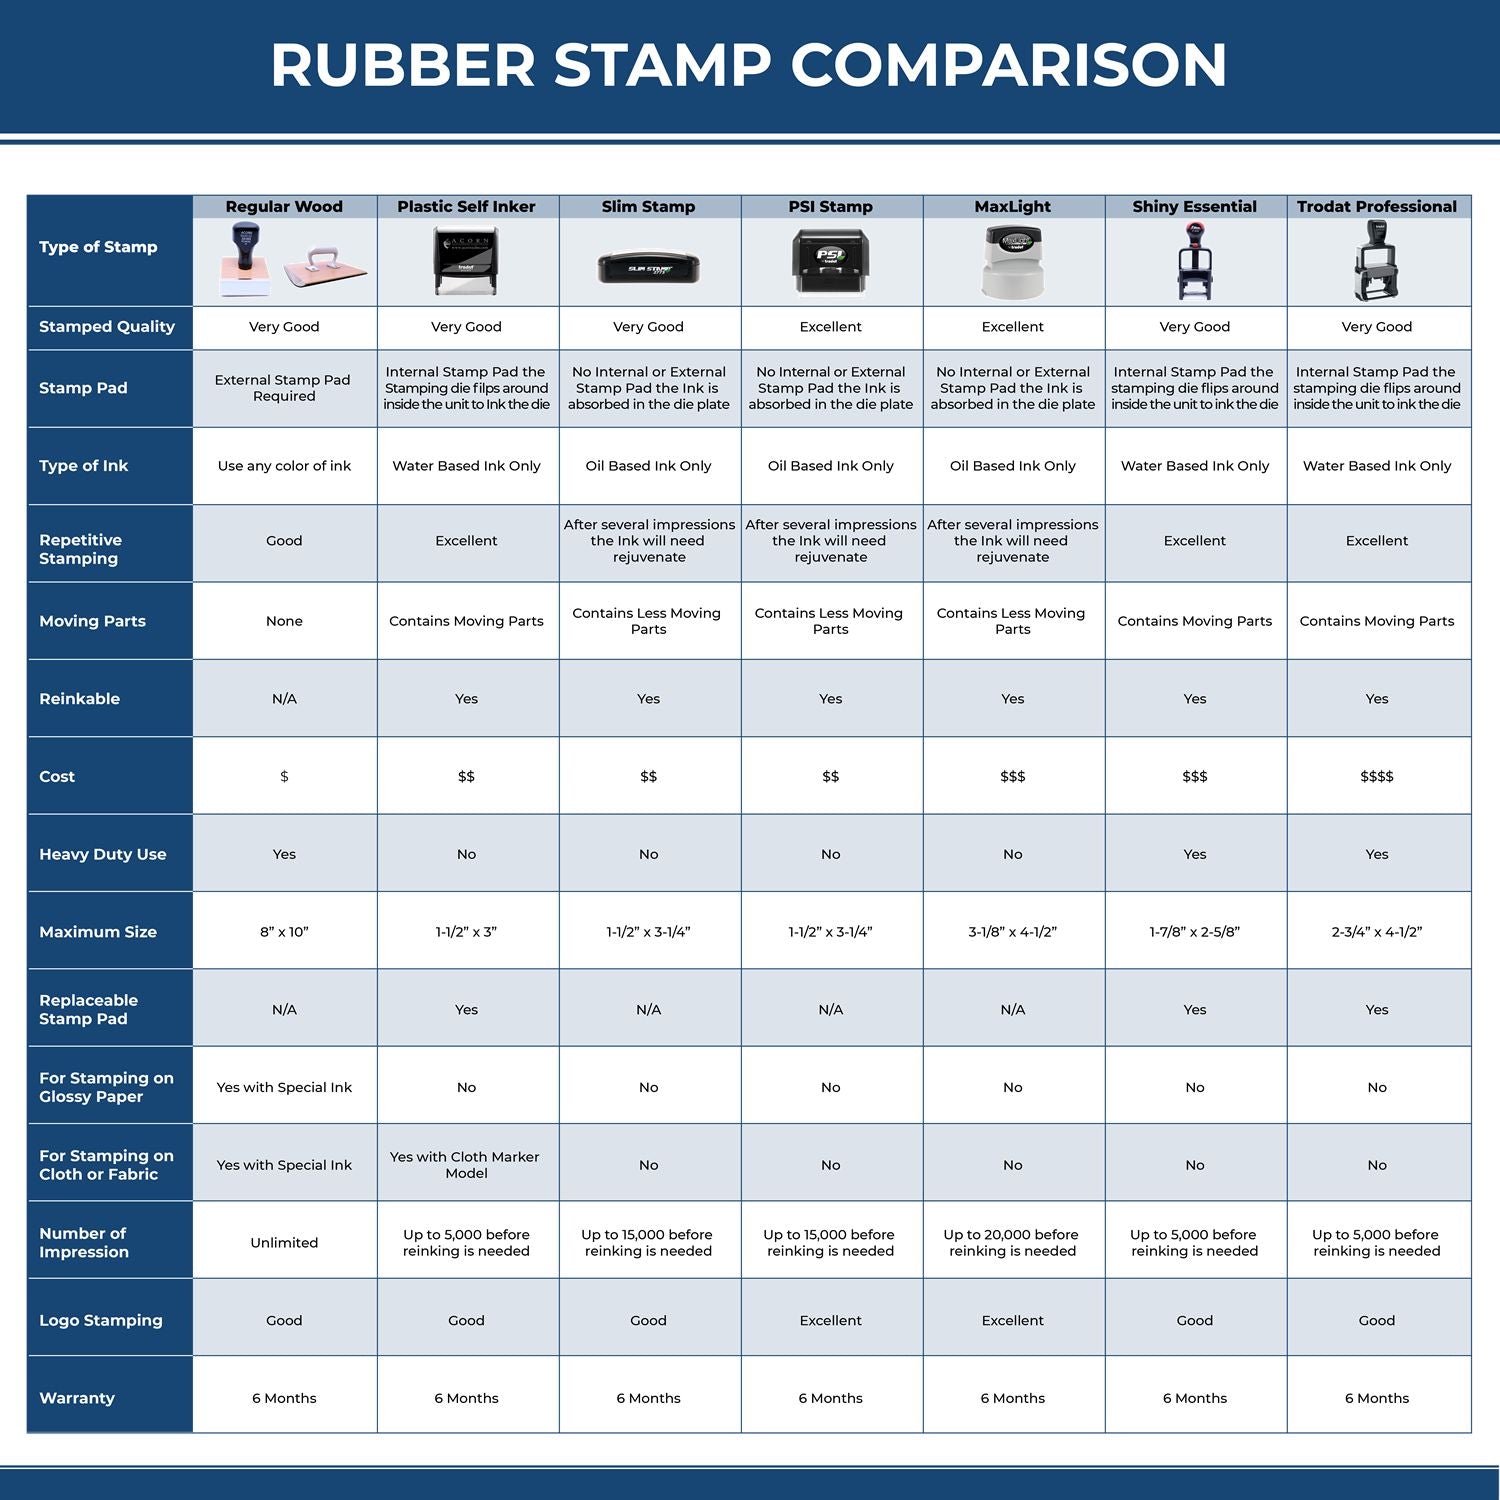 Large Self Inking Sign Date Stamp 4632S Rubber Stamp Comparison